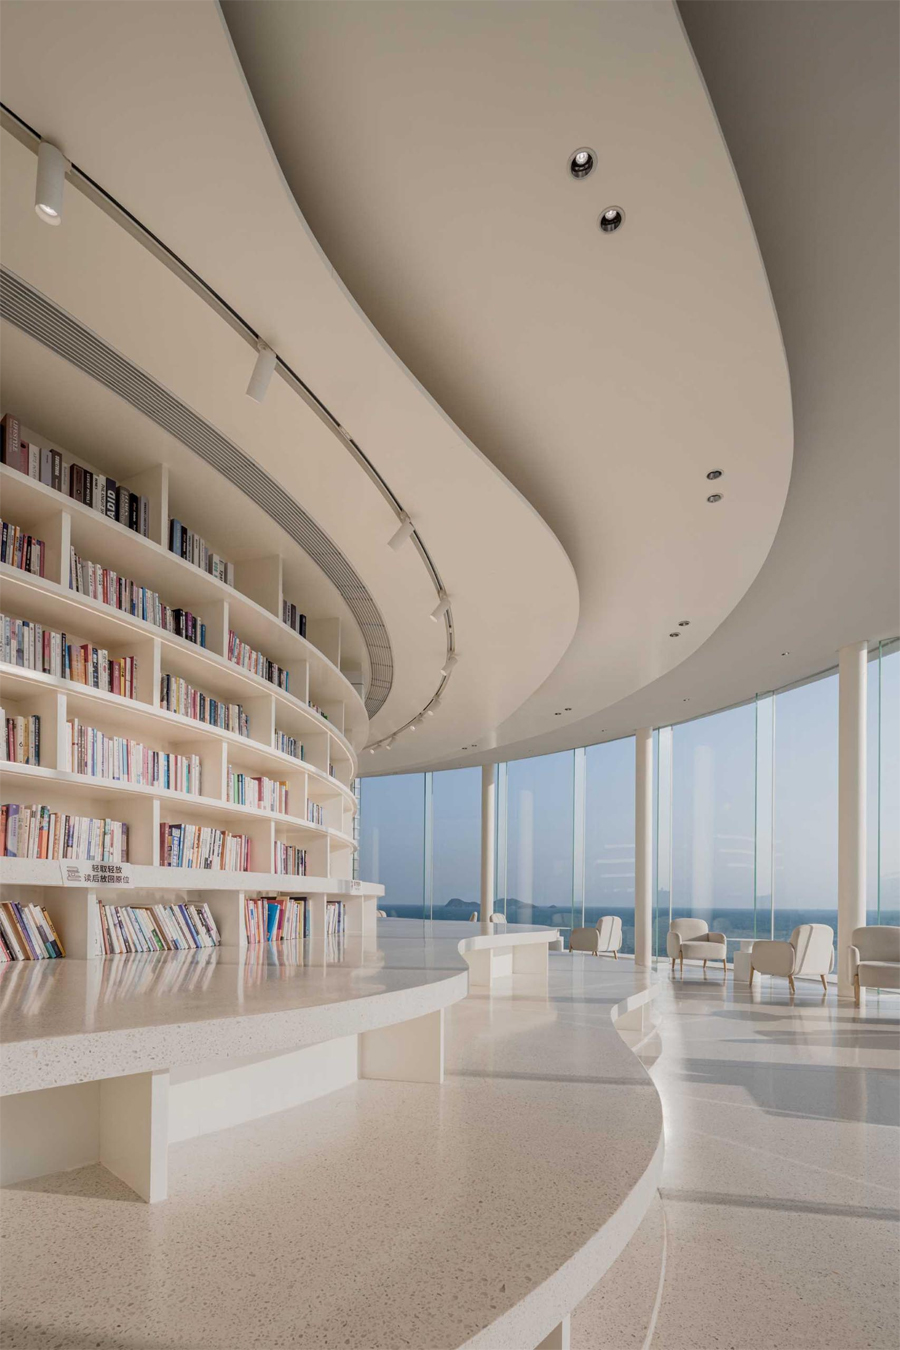 Clifftop Library in China with Circular Pool